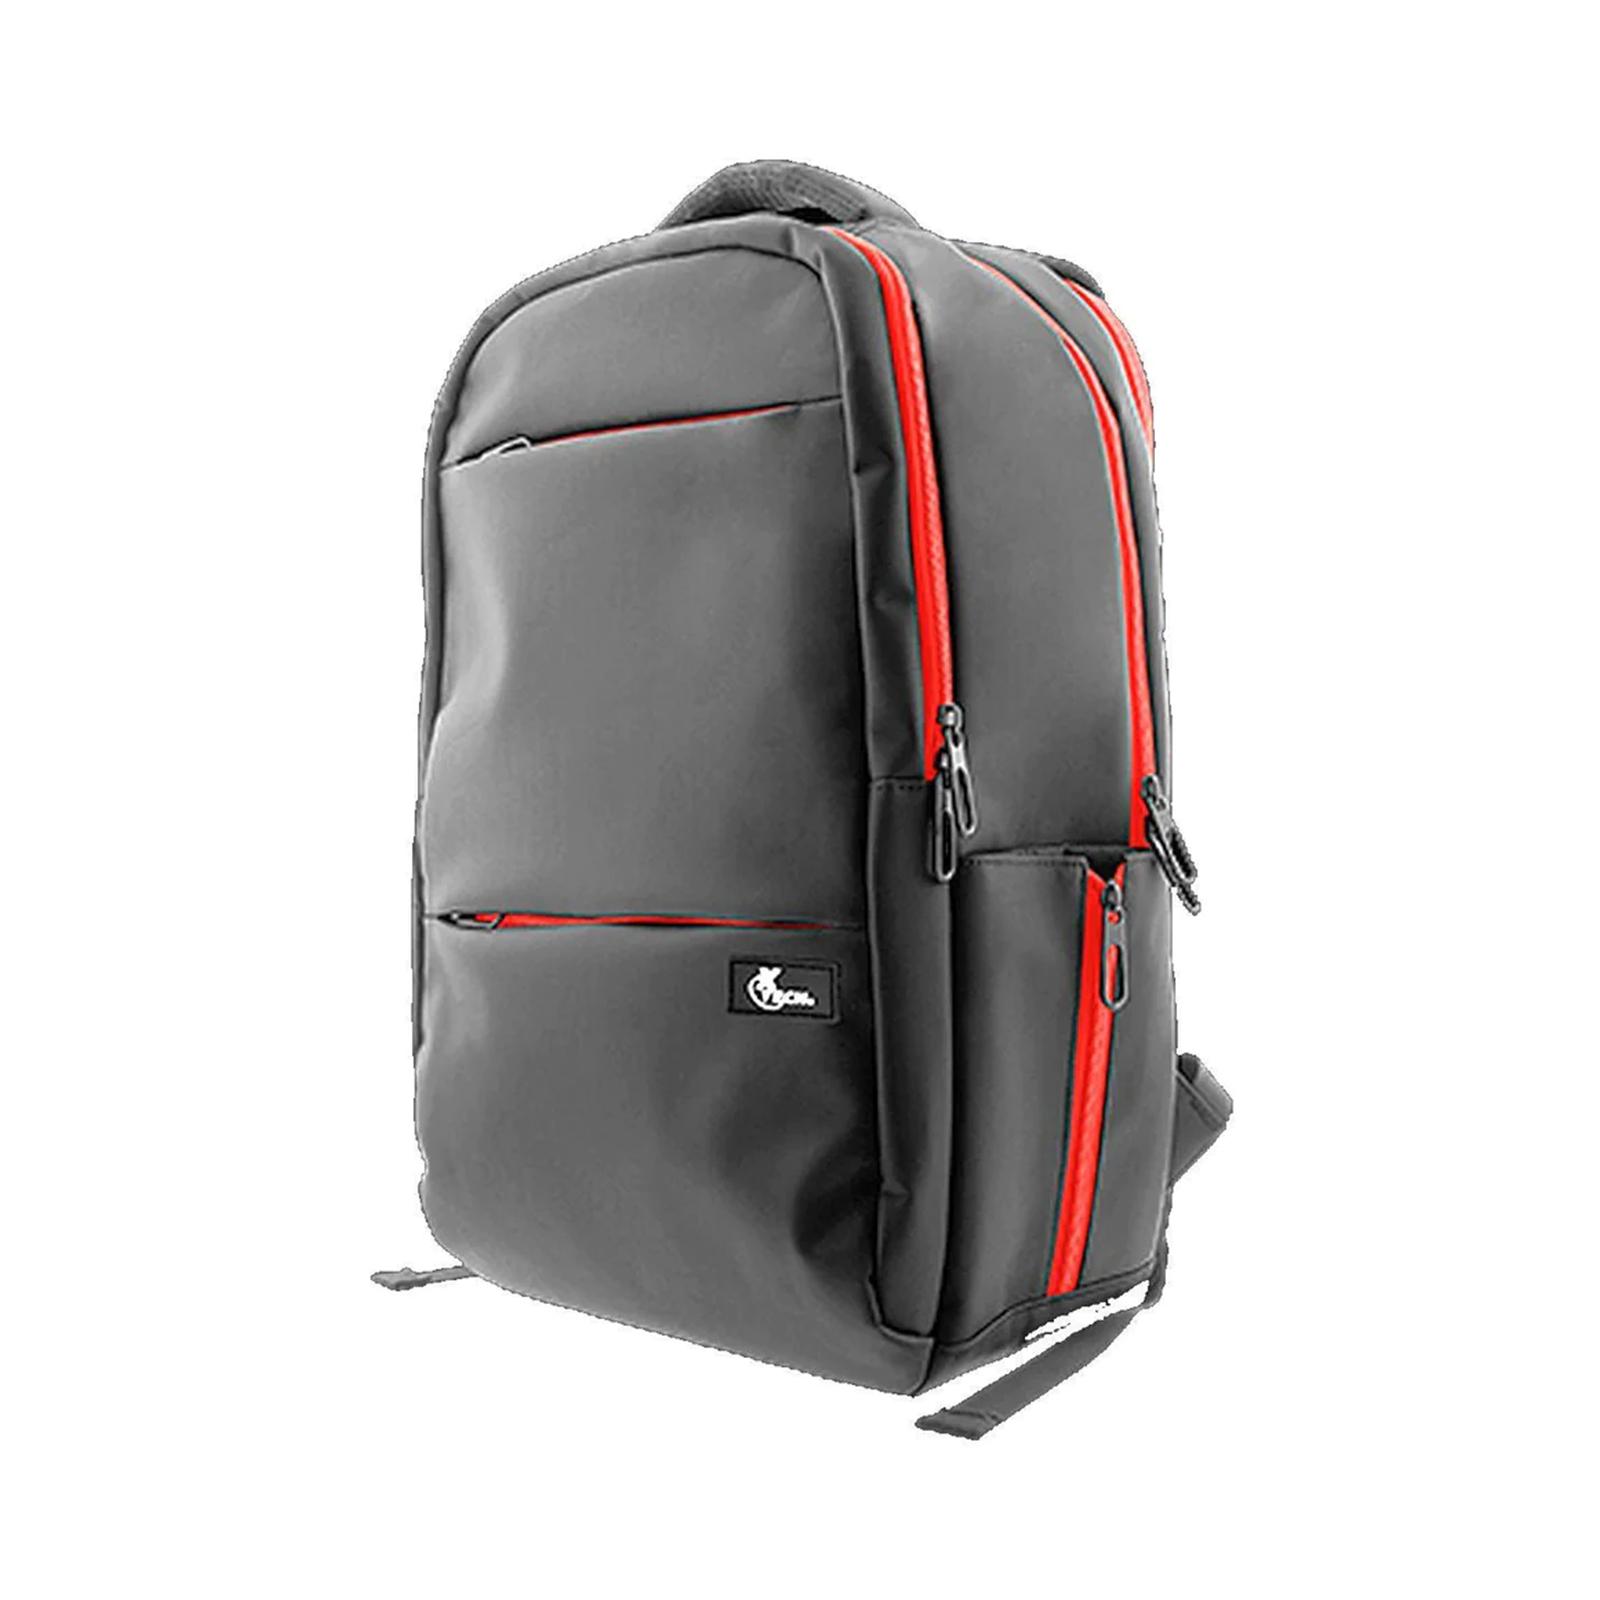 BACKPACK: XTECH 17 INCH